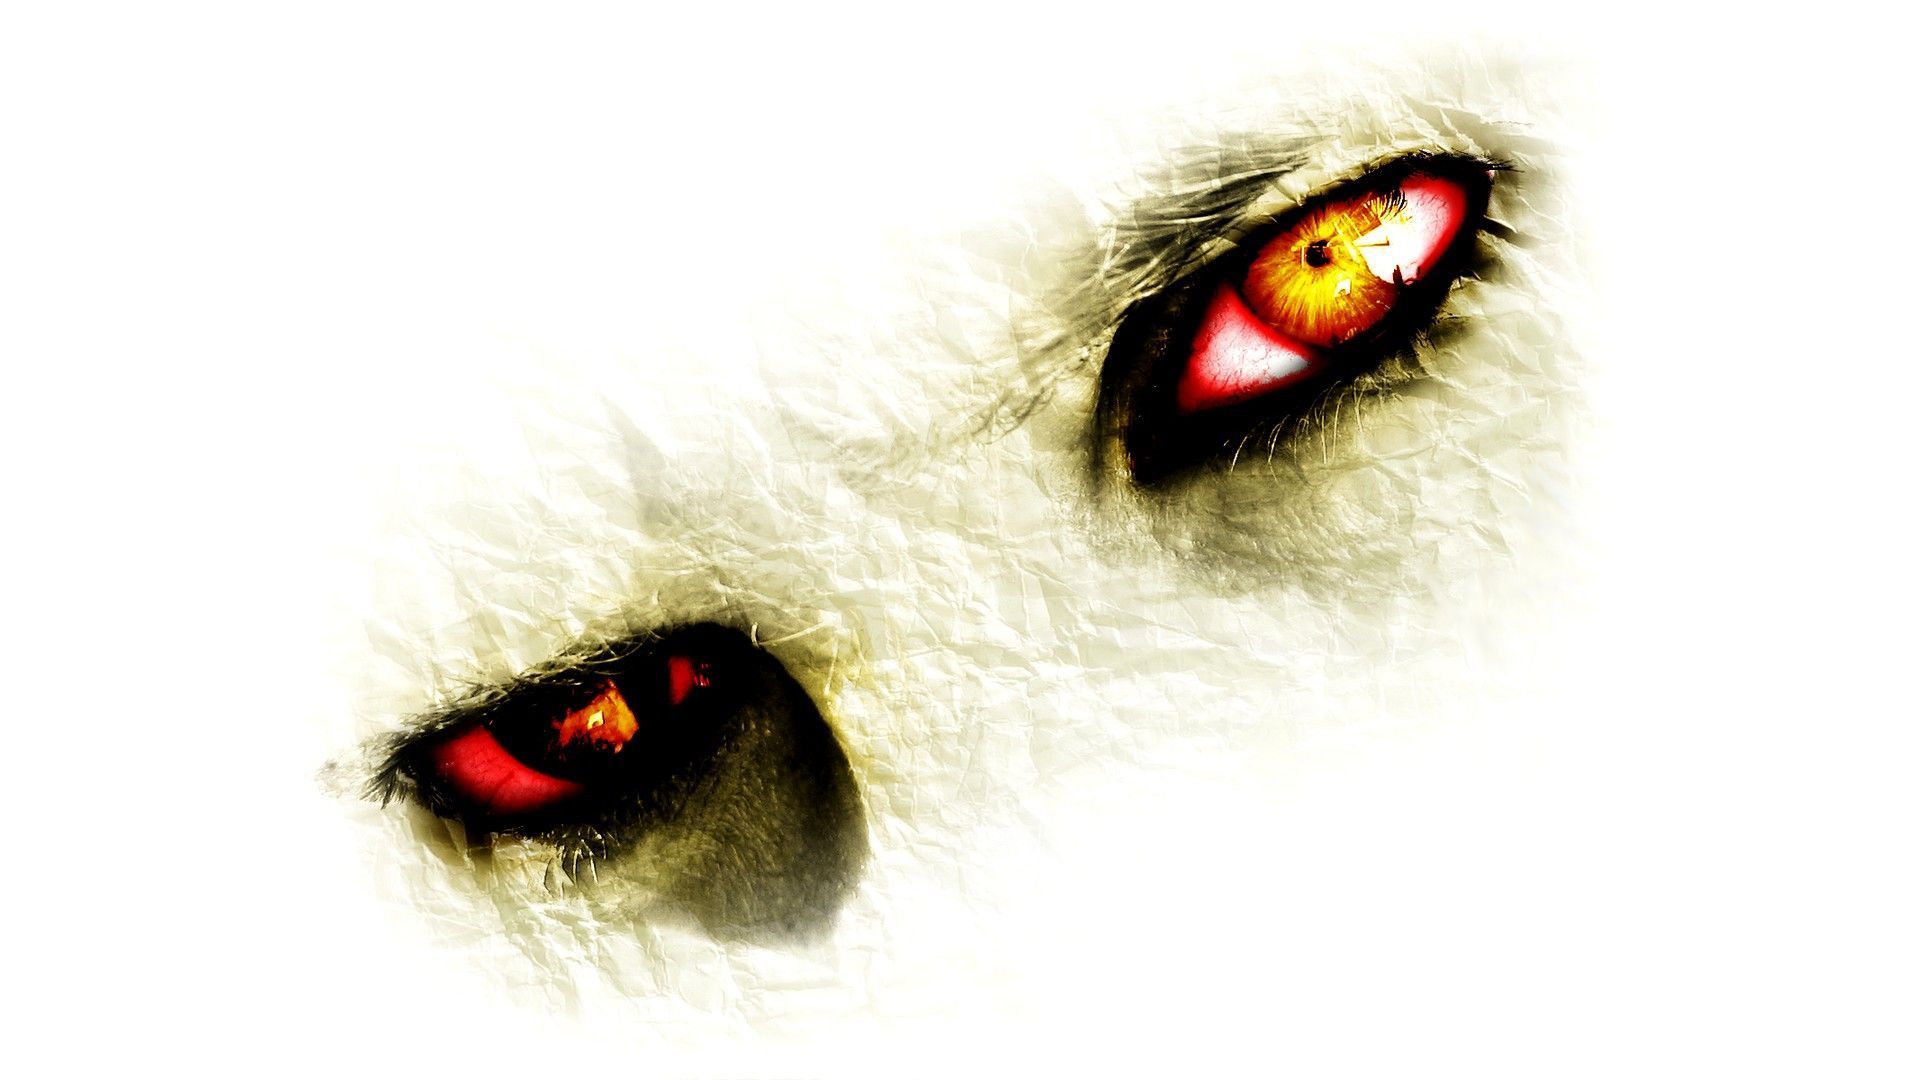 Most dangerous eyes wallpaper you will ever see